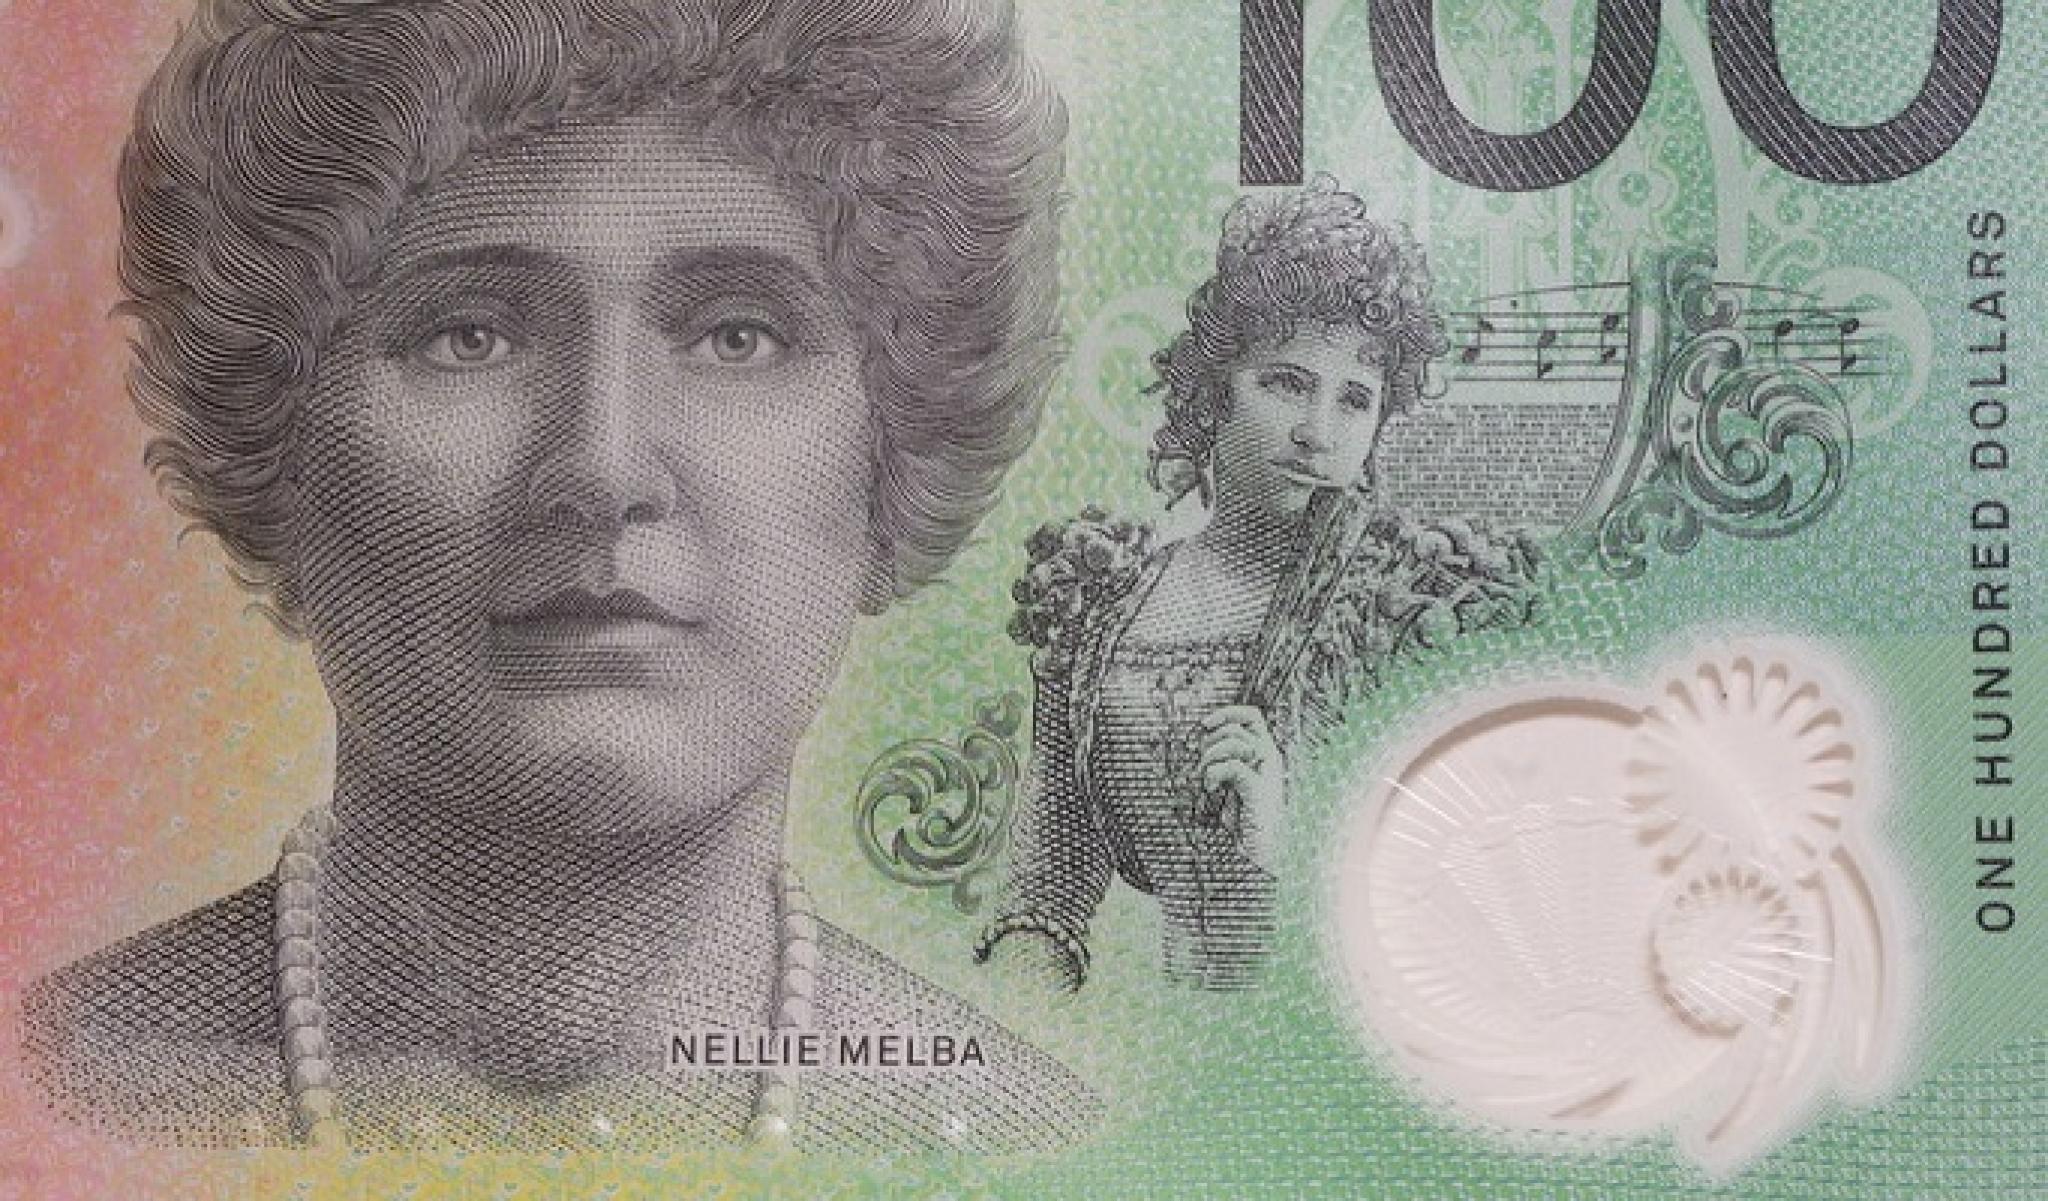 Image of Dame Nellie Melba on the AUD$100 note from https://flic.kr/p/2oxSjcb by https://www.flickr.com/people/spelio/, free to use under CC BY-NC-SA 2.0 DEED